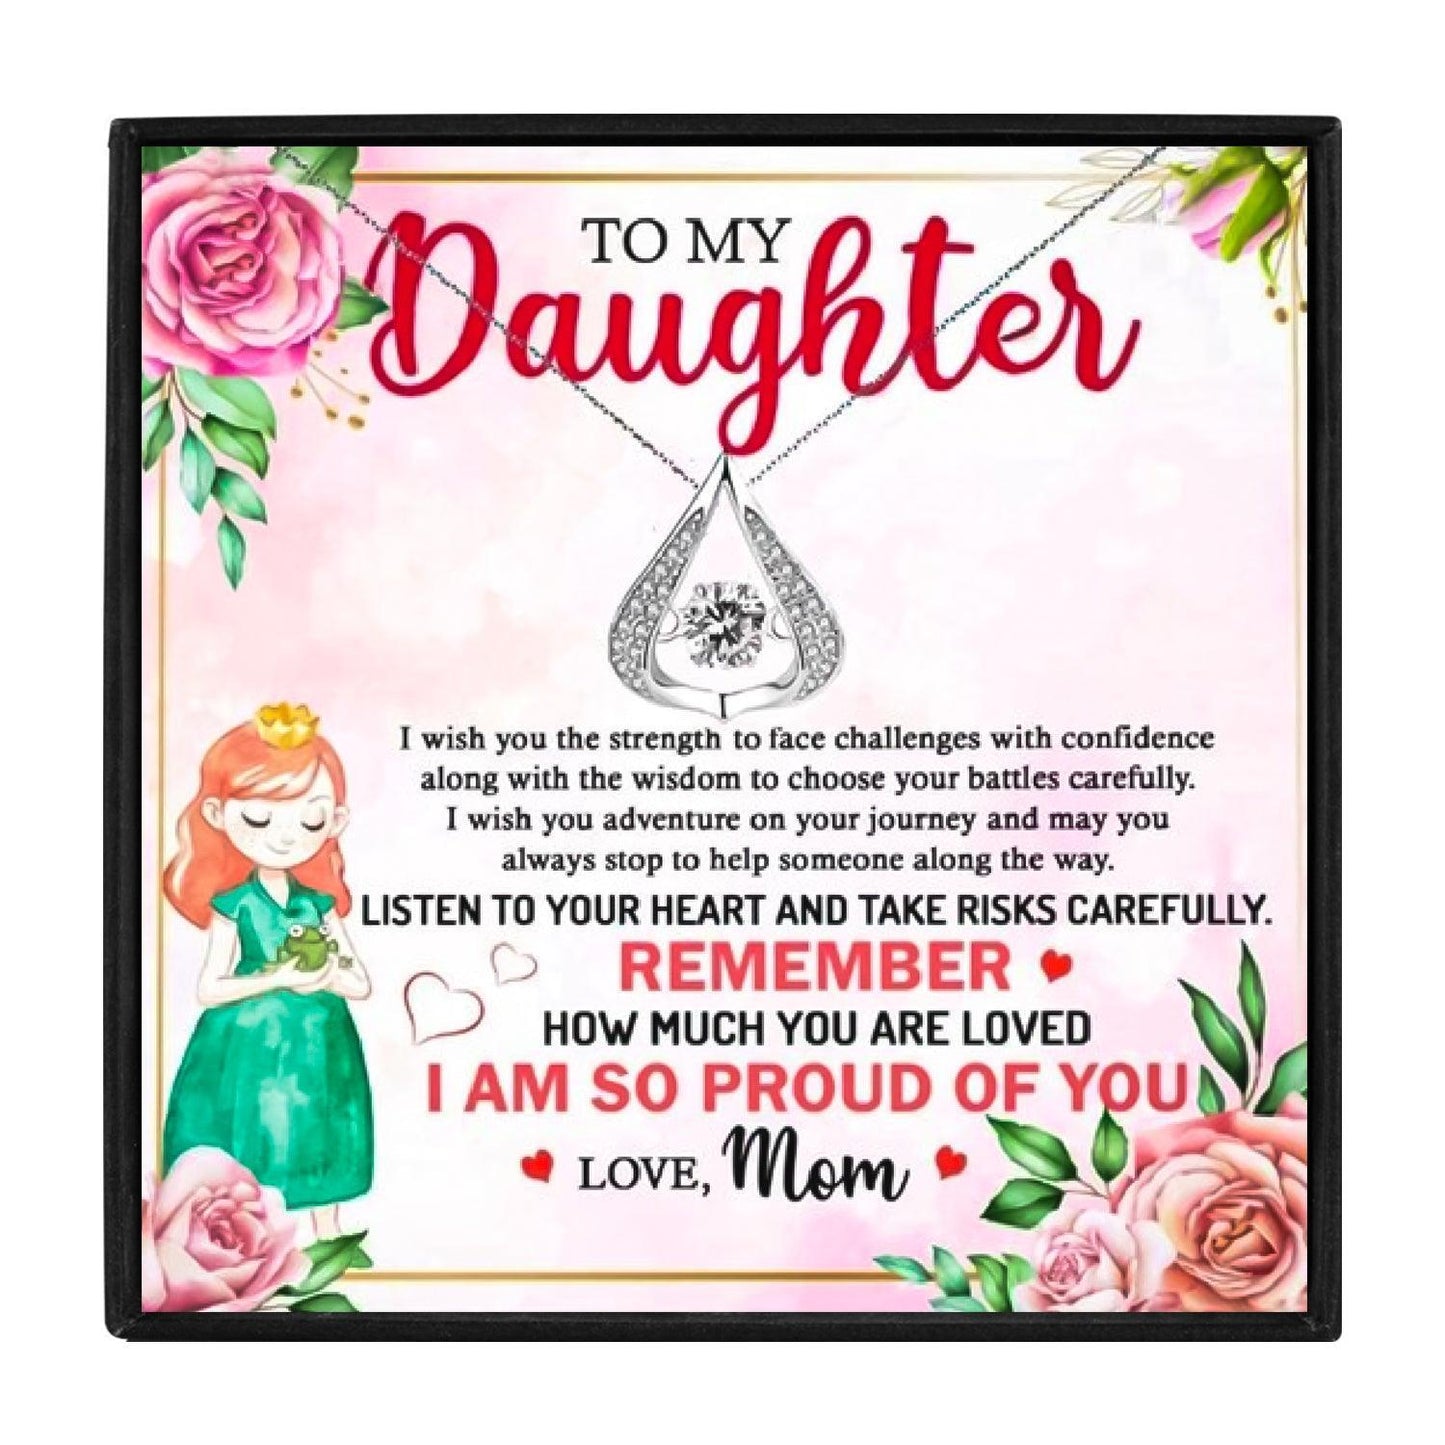 Dear Daughter Necklace Gift Set From Mom in 2023 | Dear Daughter Necklace Gift Set From Mom - undefined | daughter necklace, mother and daughter jewellery, mother daughter jewelry, mother daughter necklace | From Hunny Life | hunnylife.com